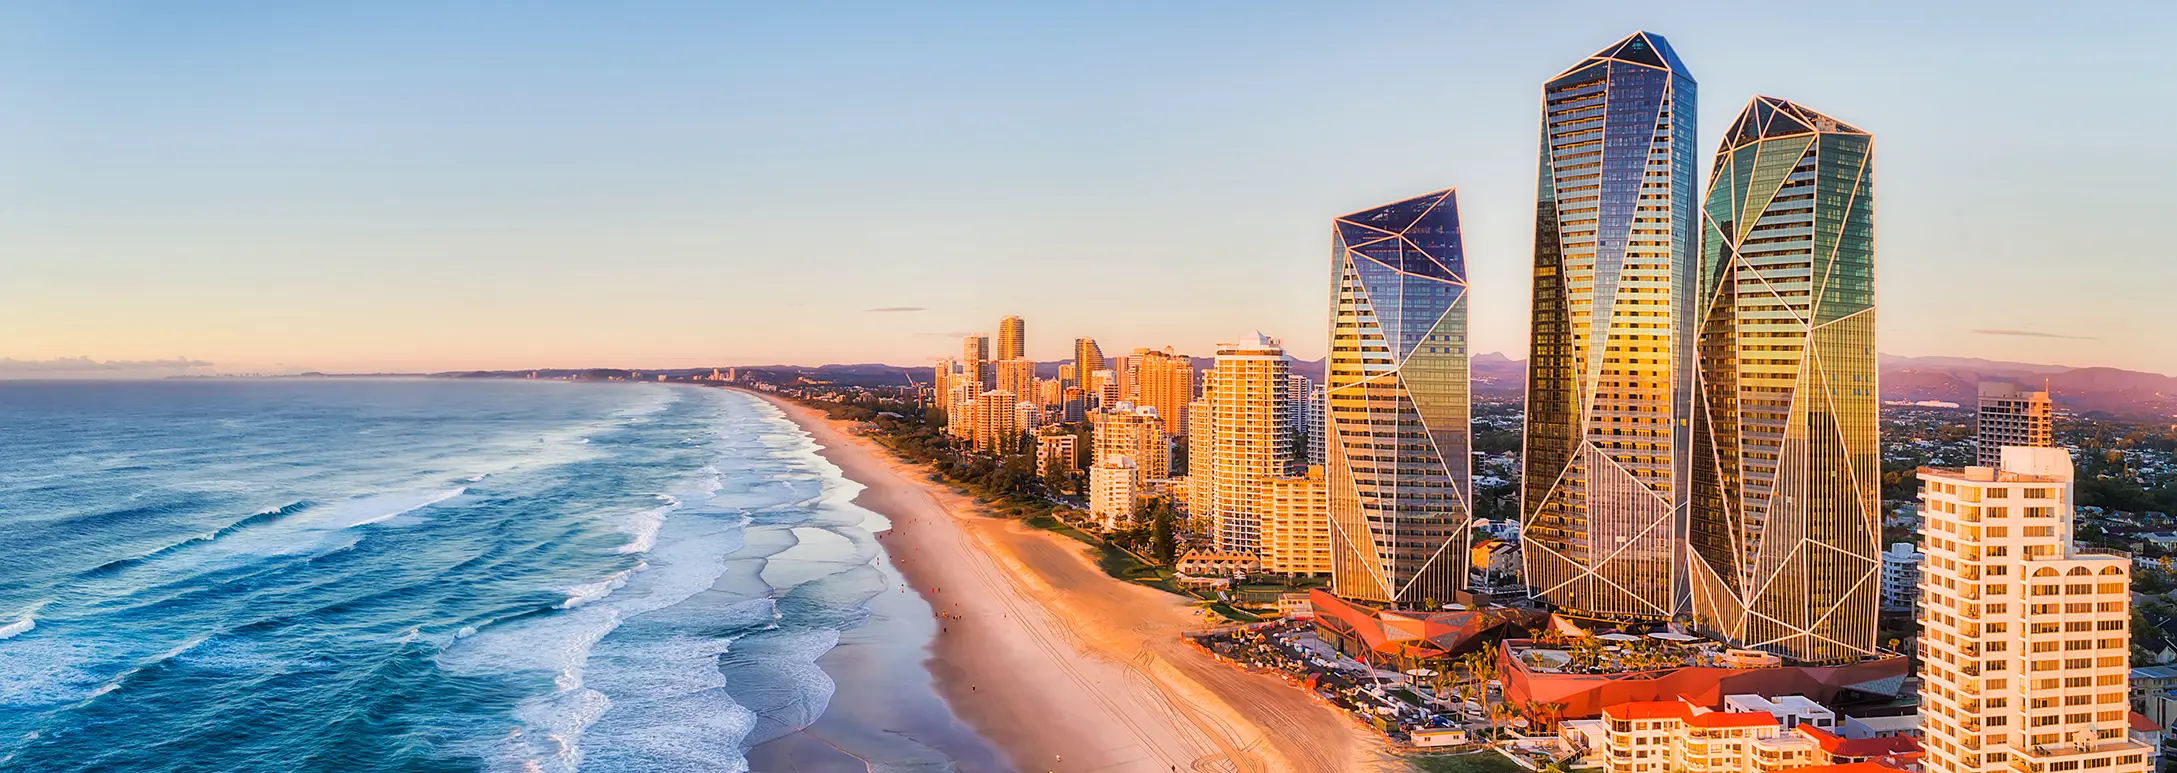 Gold Coast Airport (OOL) - Transfer Options